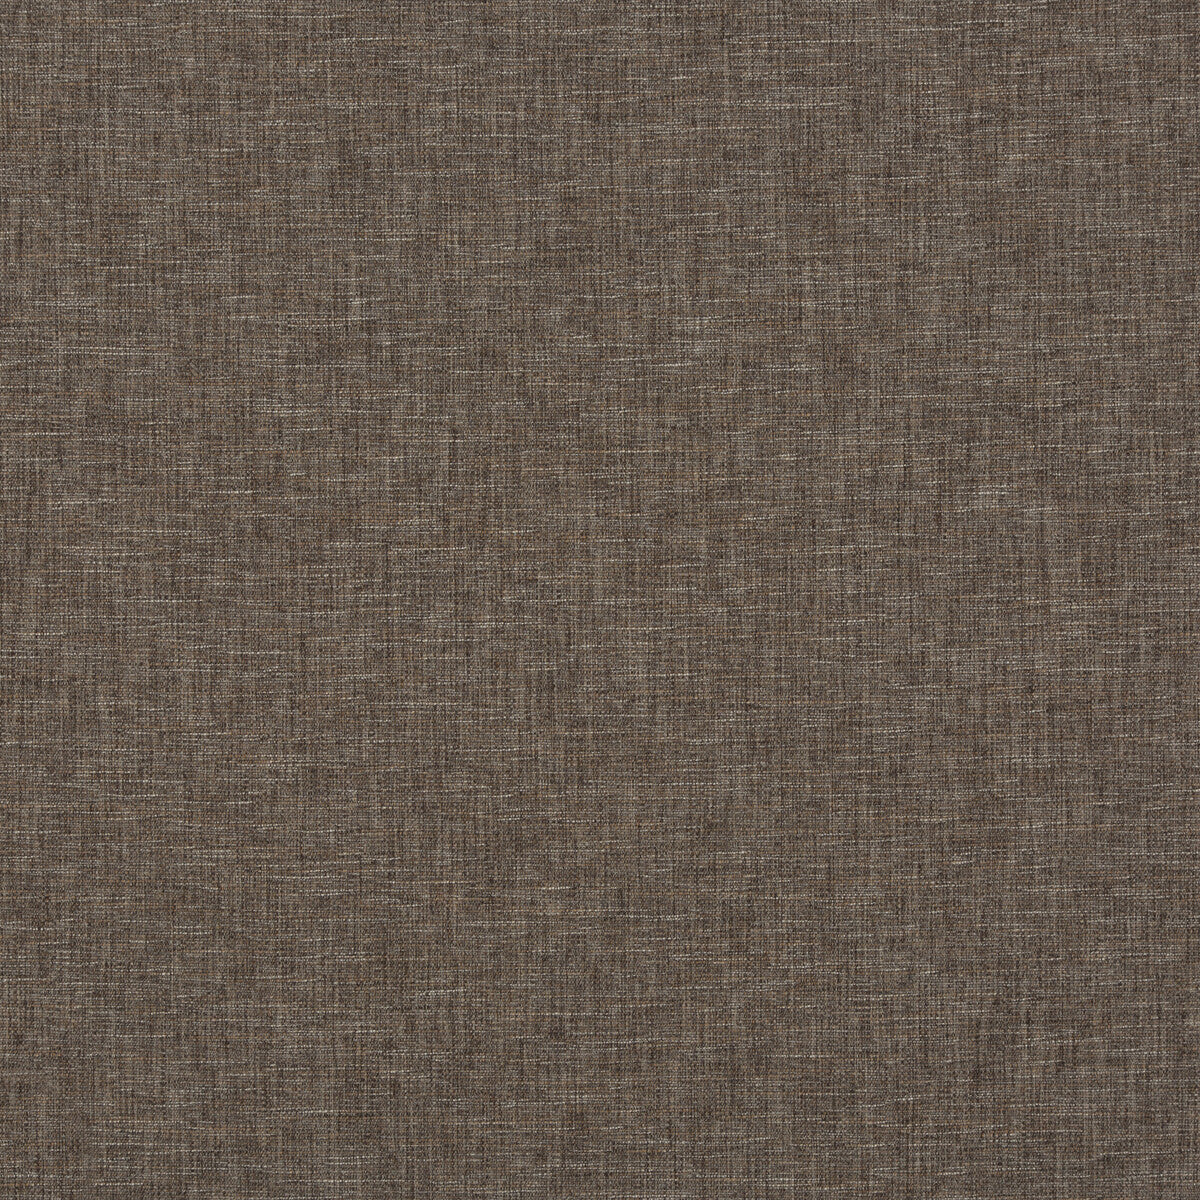 Kinnerton fabric in woodsmoke color - pattern PF50414.935.0 - by Baker Lifestyle in the Notebooks collection